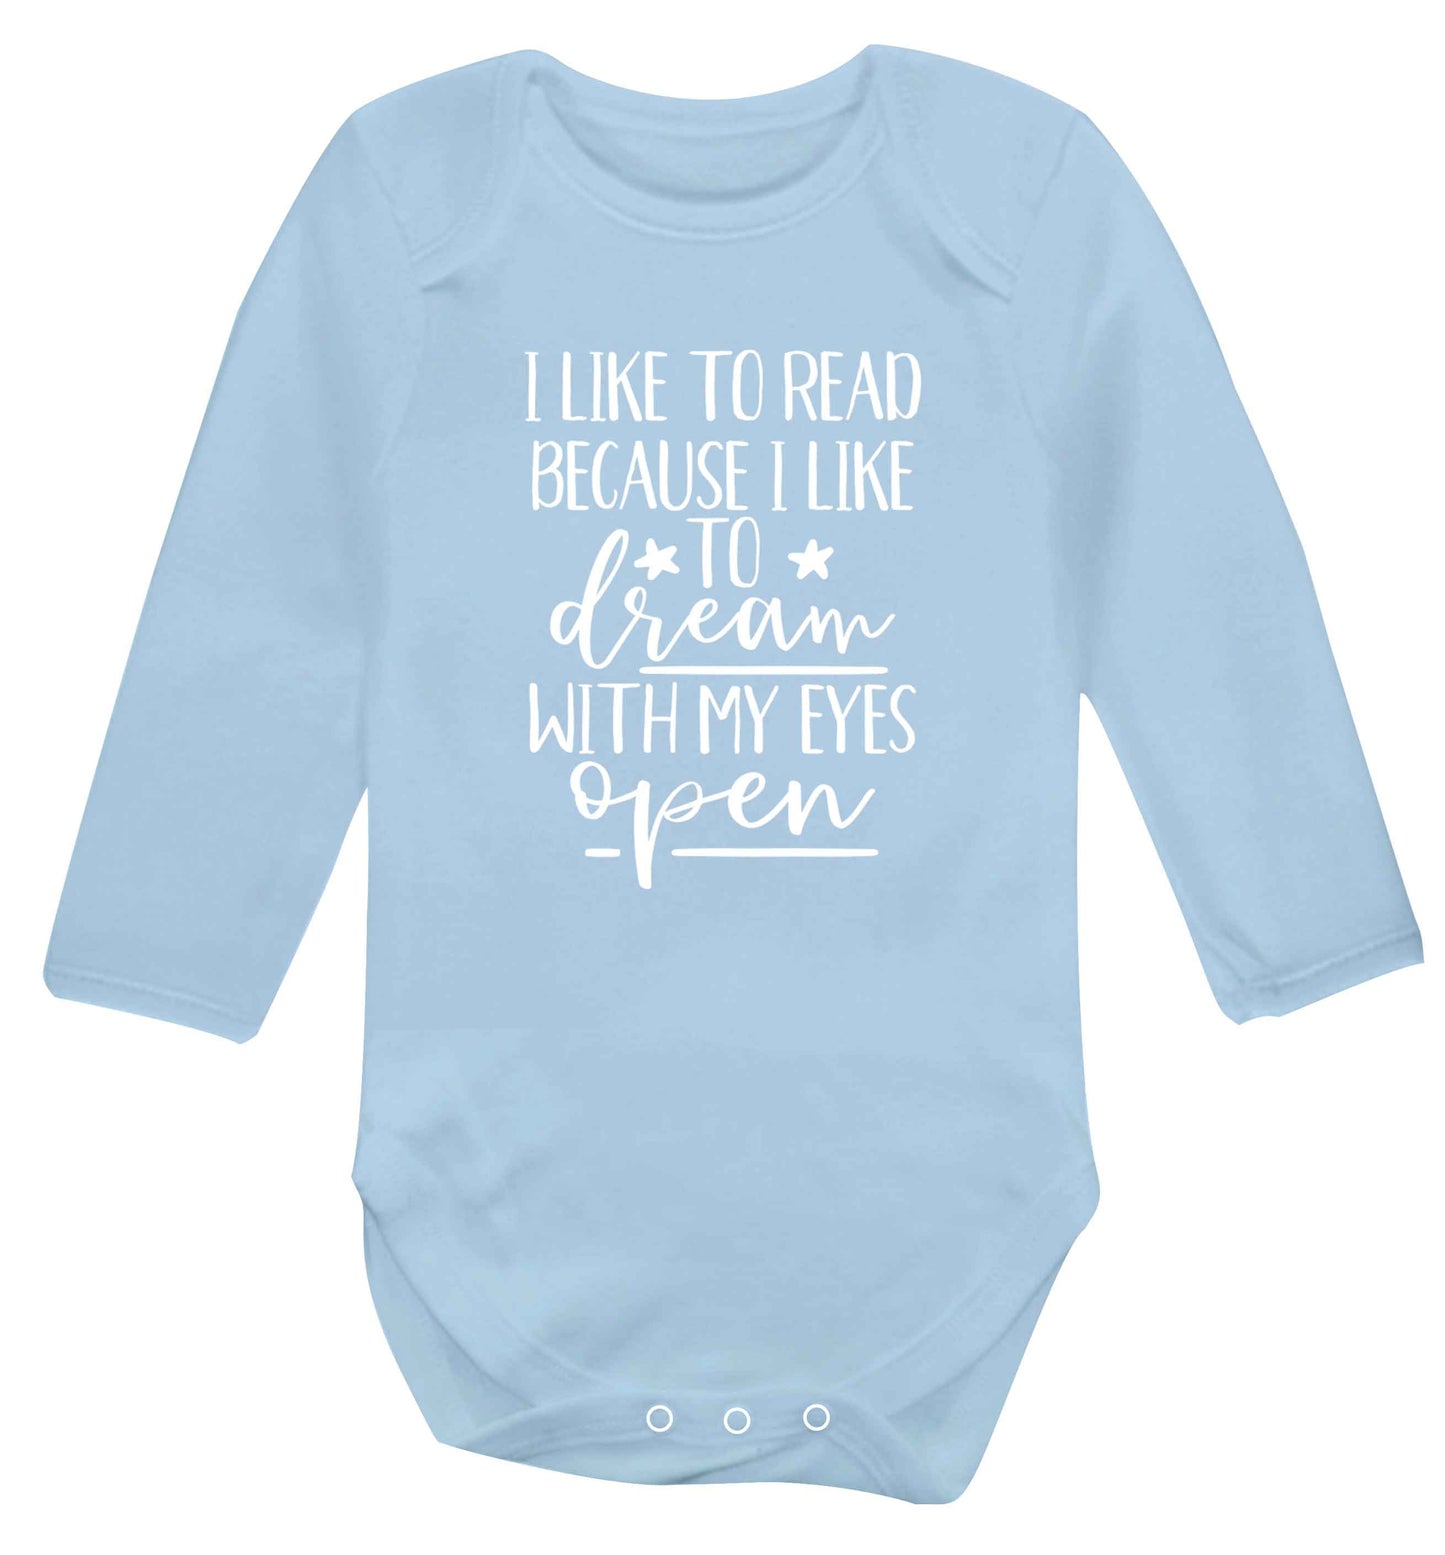 I like to read because I like to dream with my eyes open Baby Vest long sleeved pale blue 6-12 months